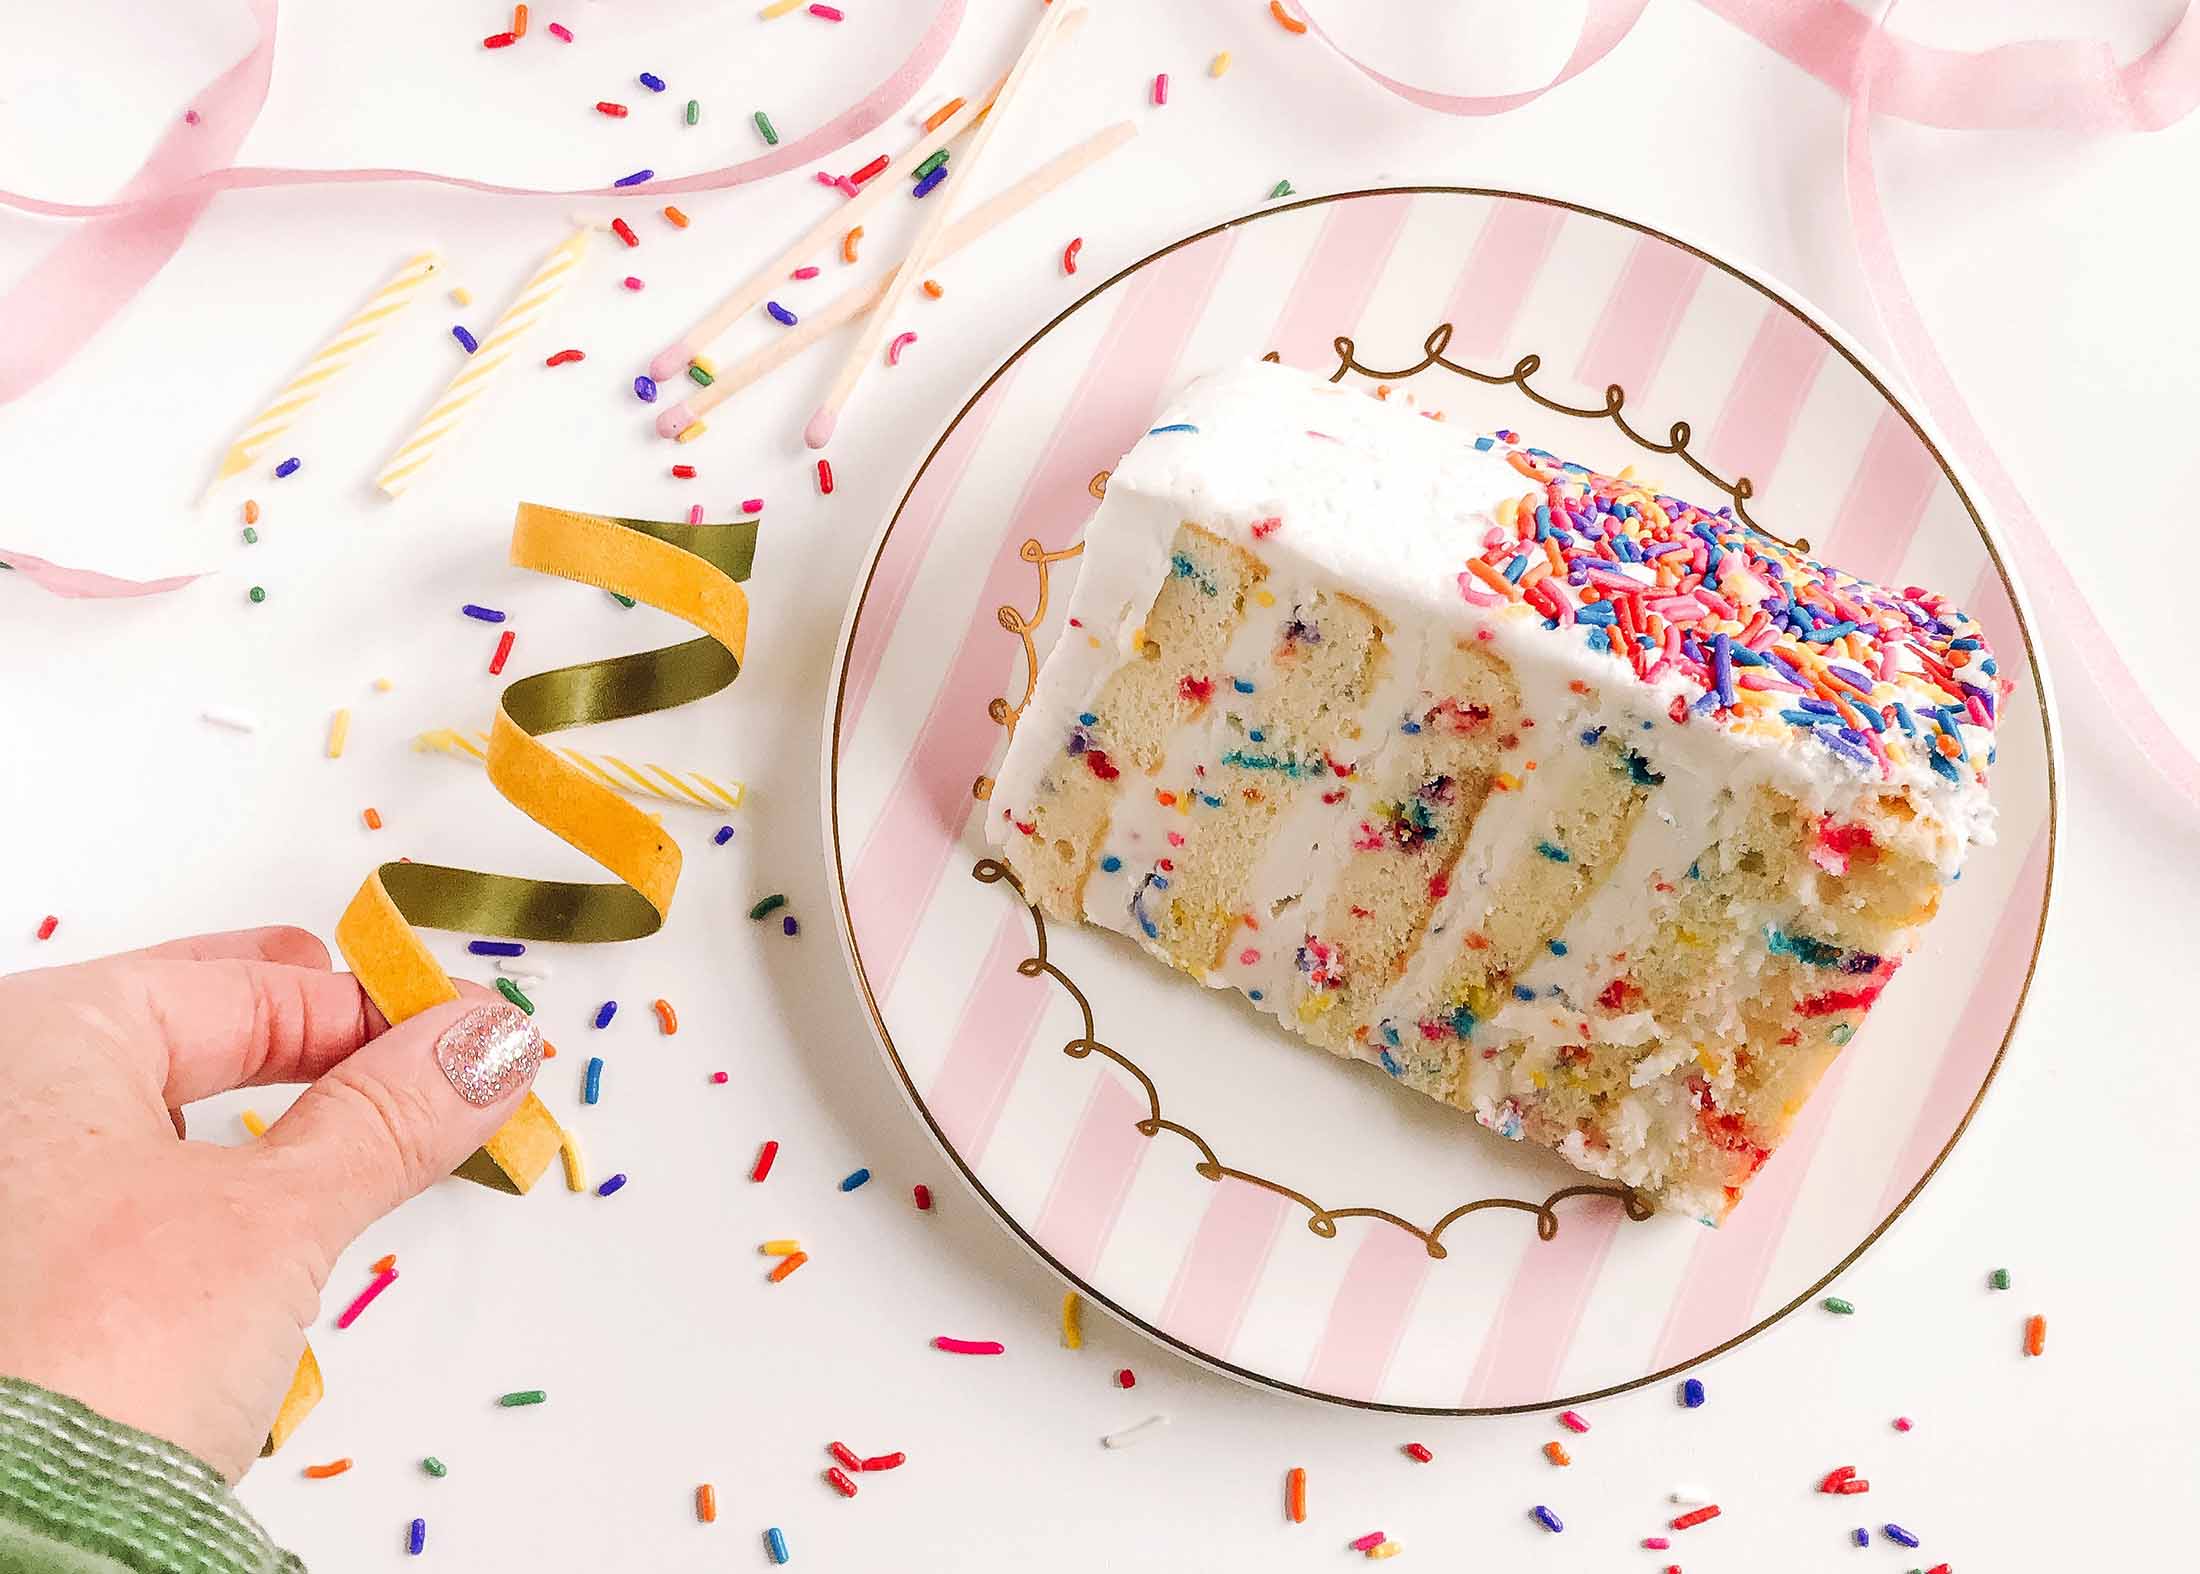 Slice of cake with streamers and sprinkles